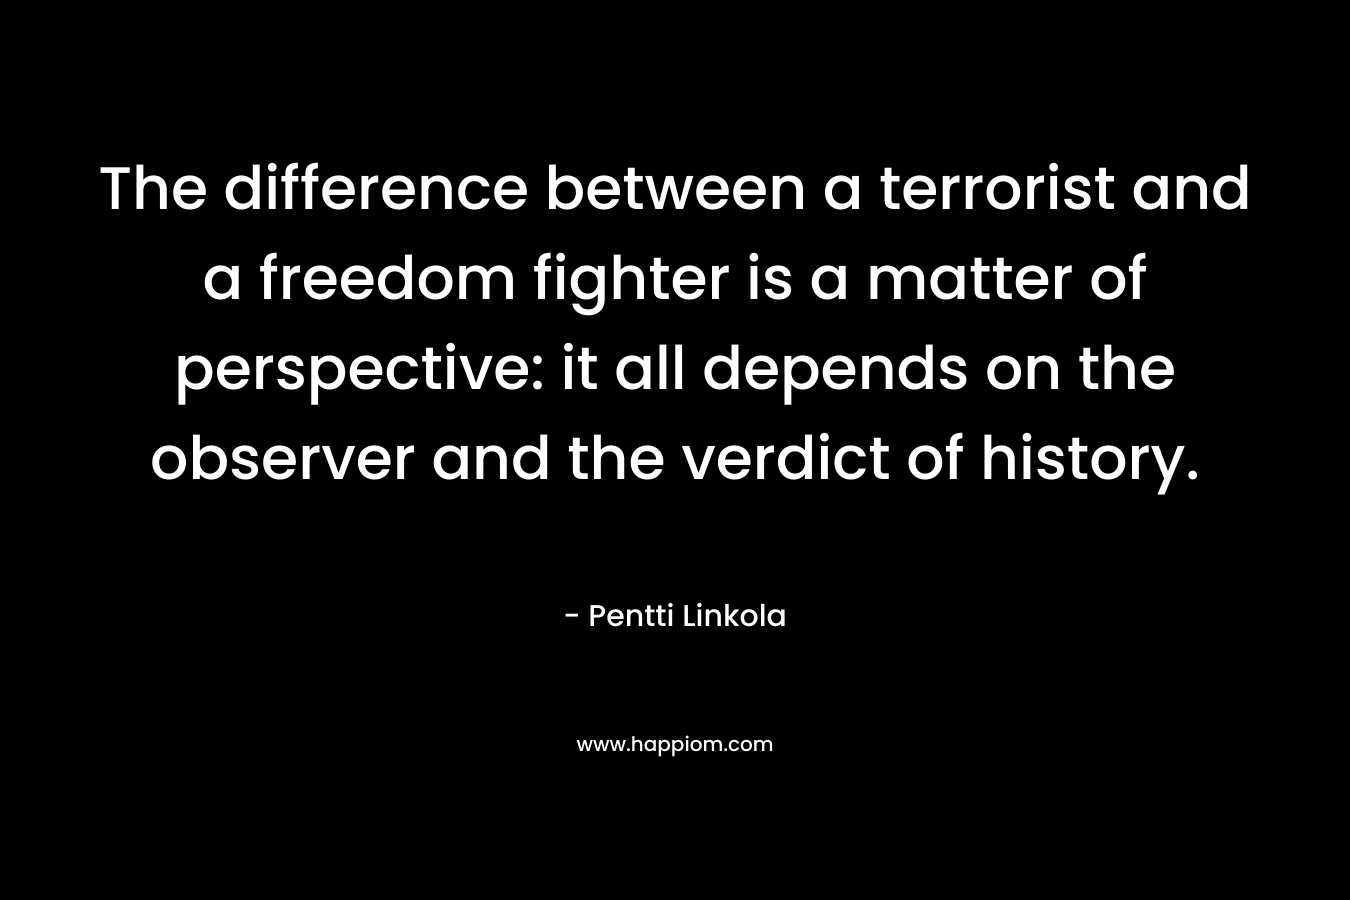 The difference between a terrorist and a freedom fighter is a matter of perspective: it all depends on the observer and the verdict of history.